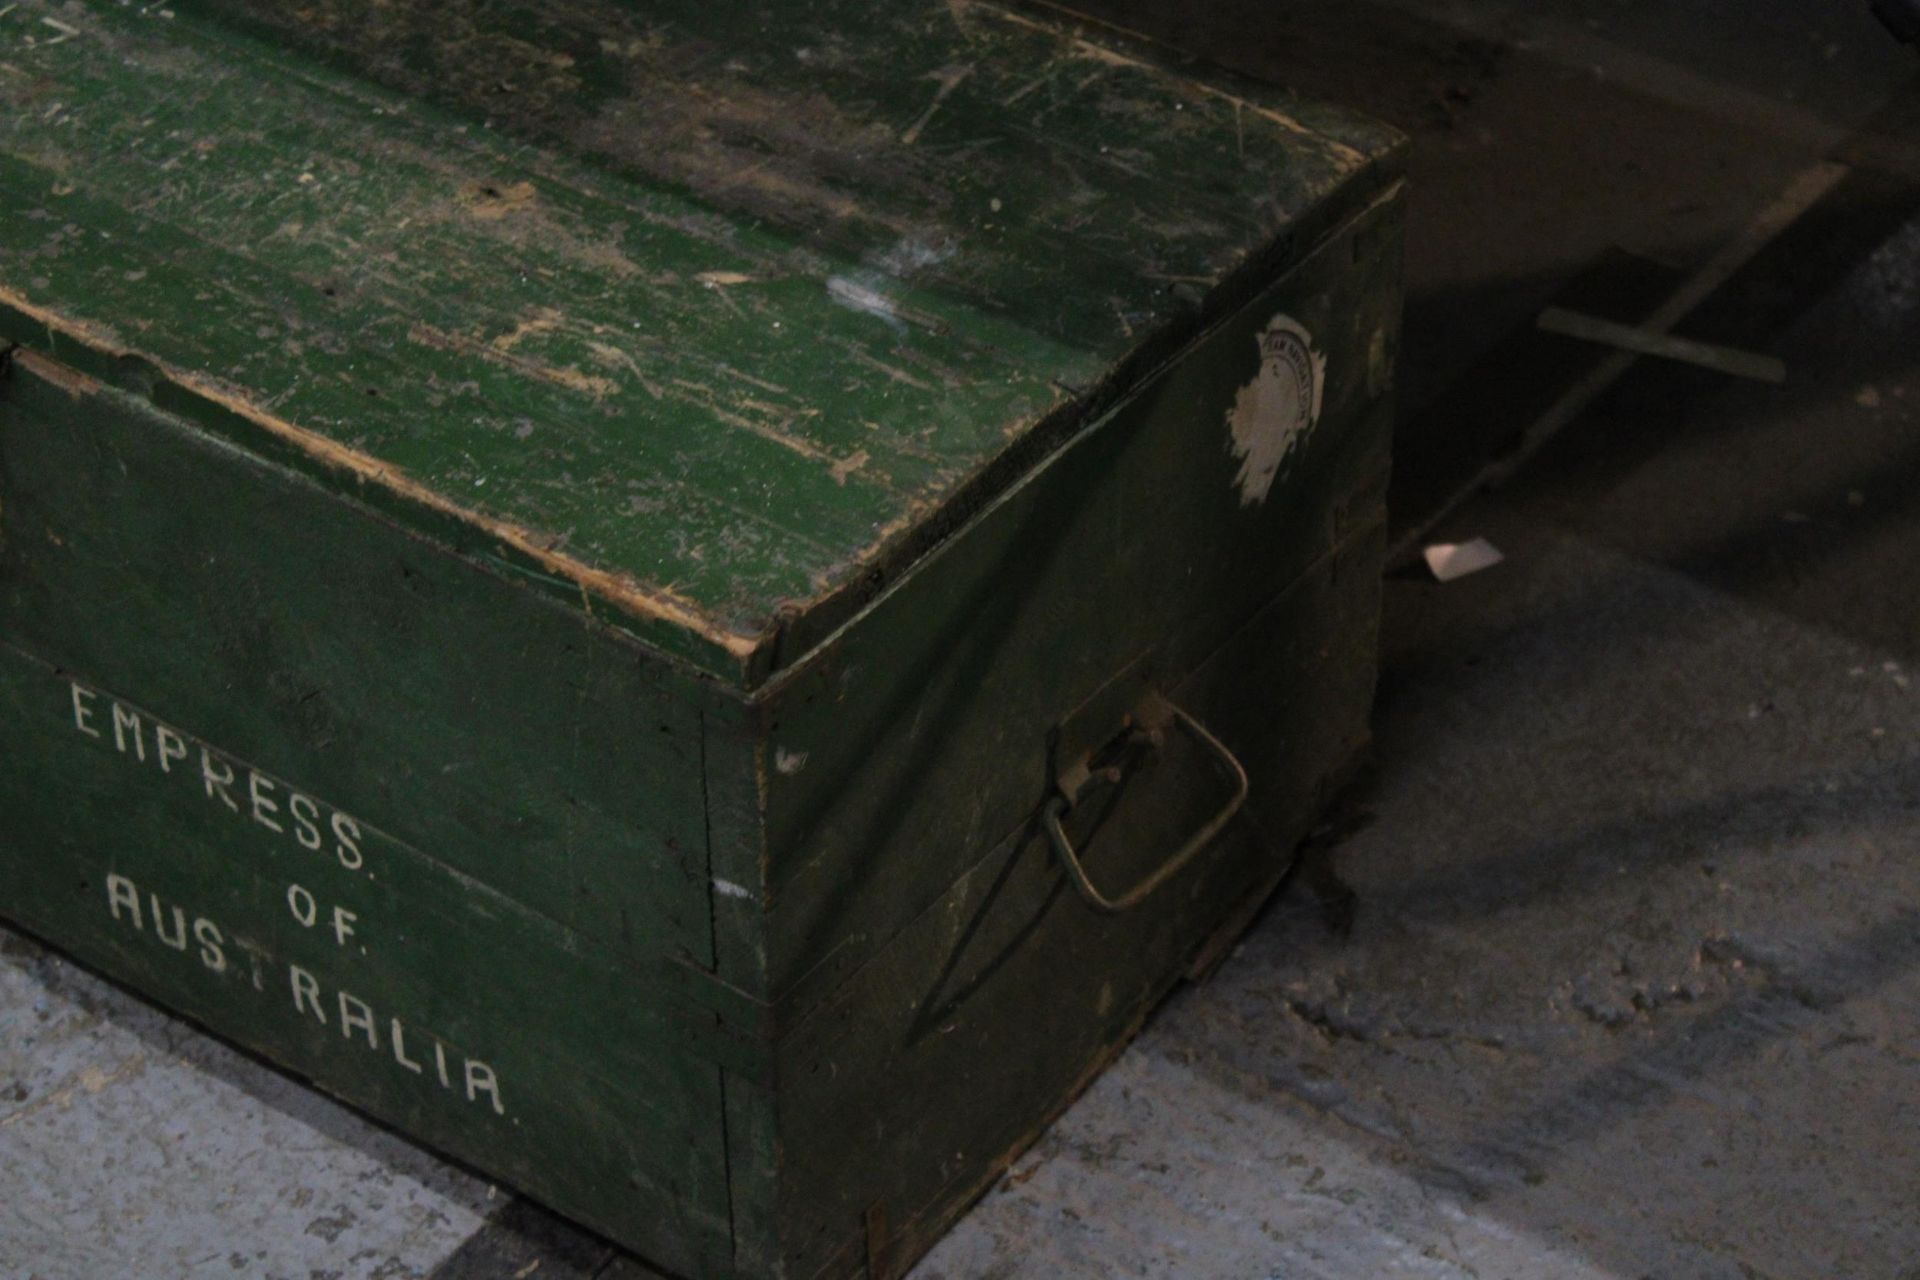 A WOODEN MILITARY TRAVEL TRUNK, 'EMPRESS OF AUSTRALIA', HEIGHT 36 CM, LENGTH 80 CM, DEPTH 44 CM - Image 2 of 3